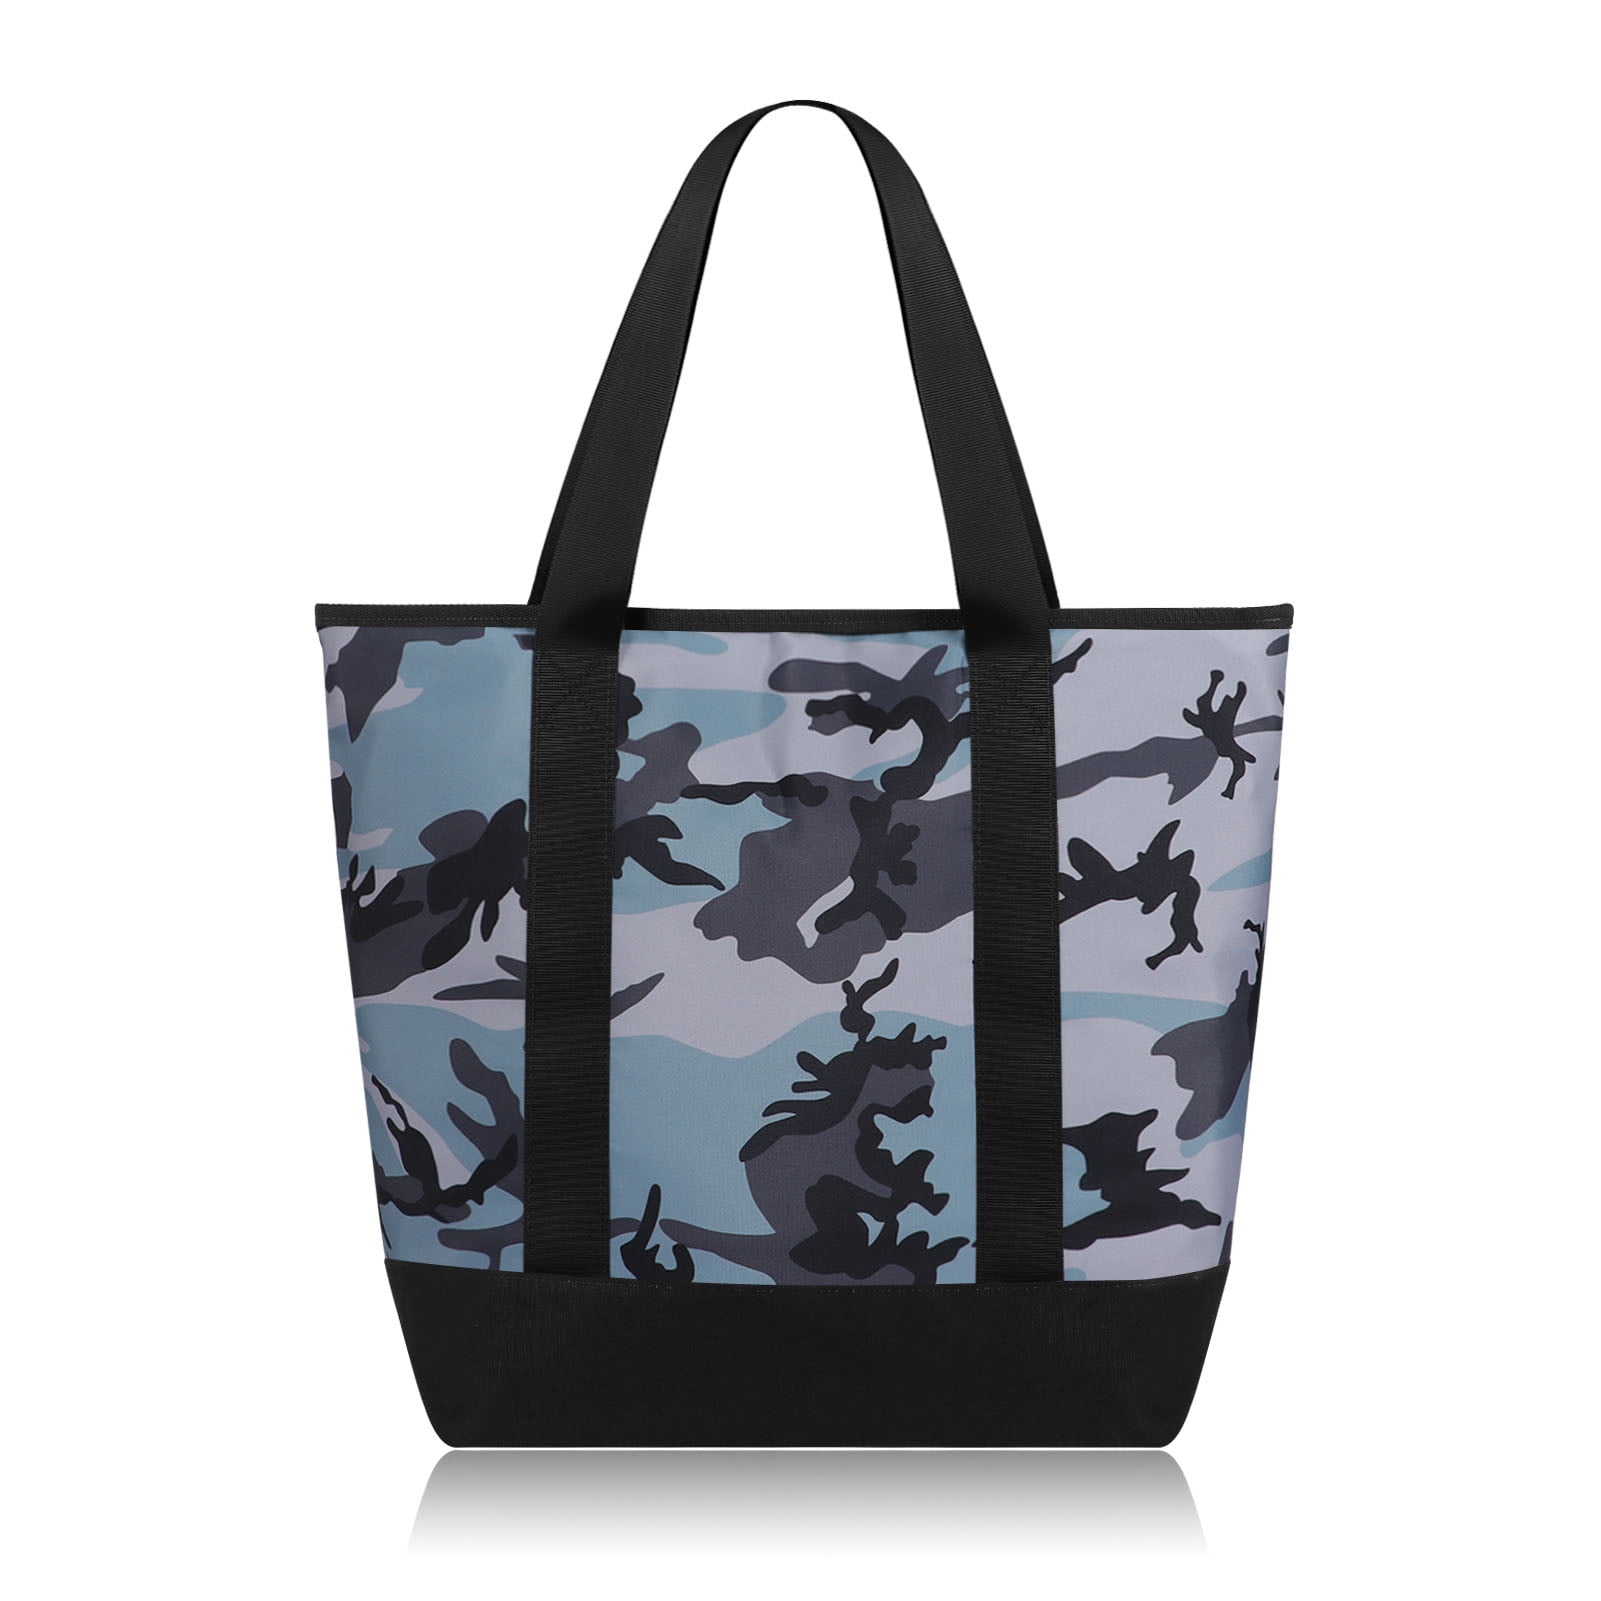 HAWEE Canvas Tote Bags for Women with Zipper and Compartments